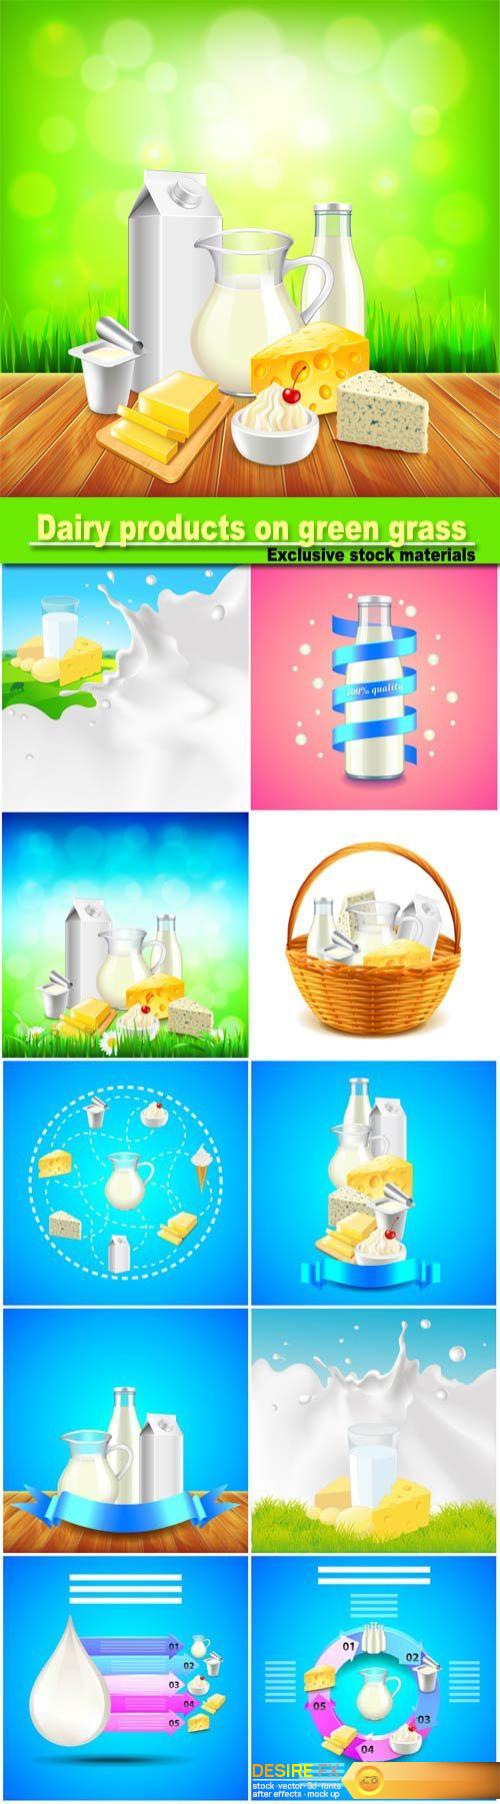 Dairy products on green grass, blue sky background vector